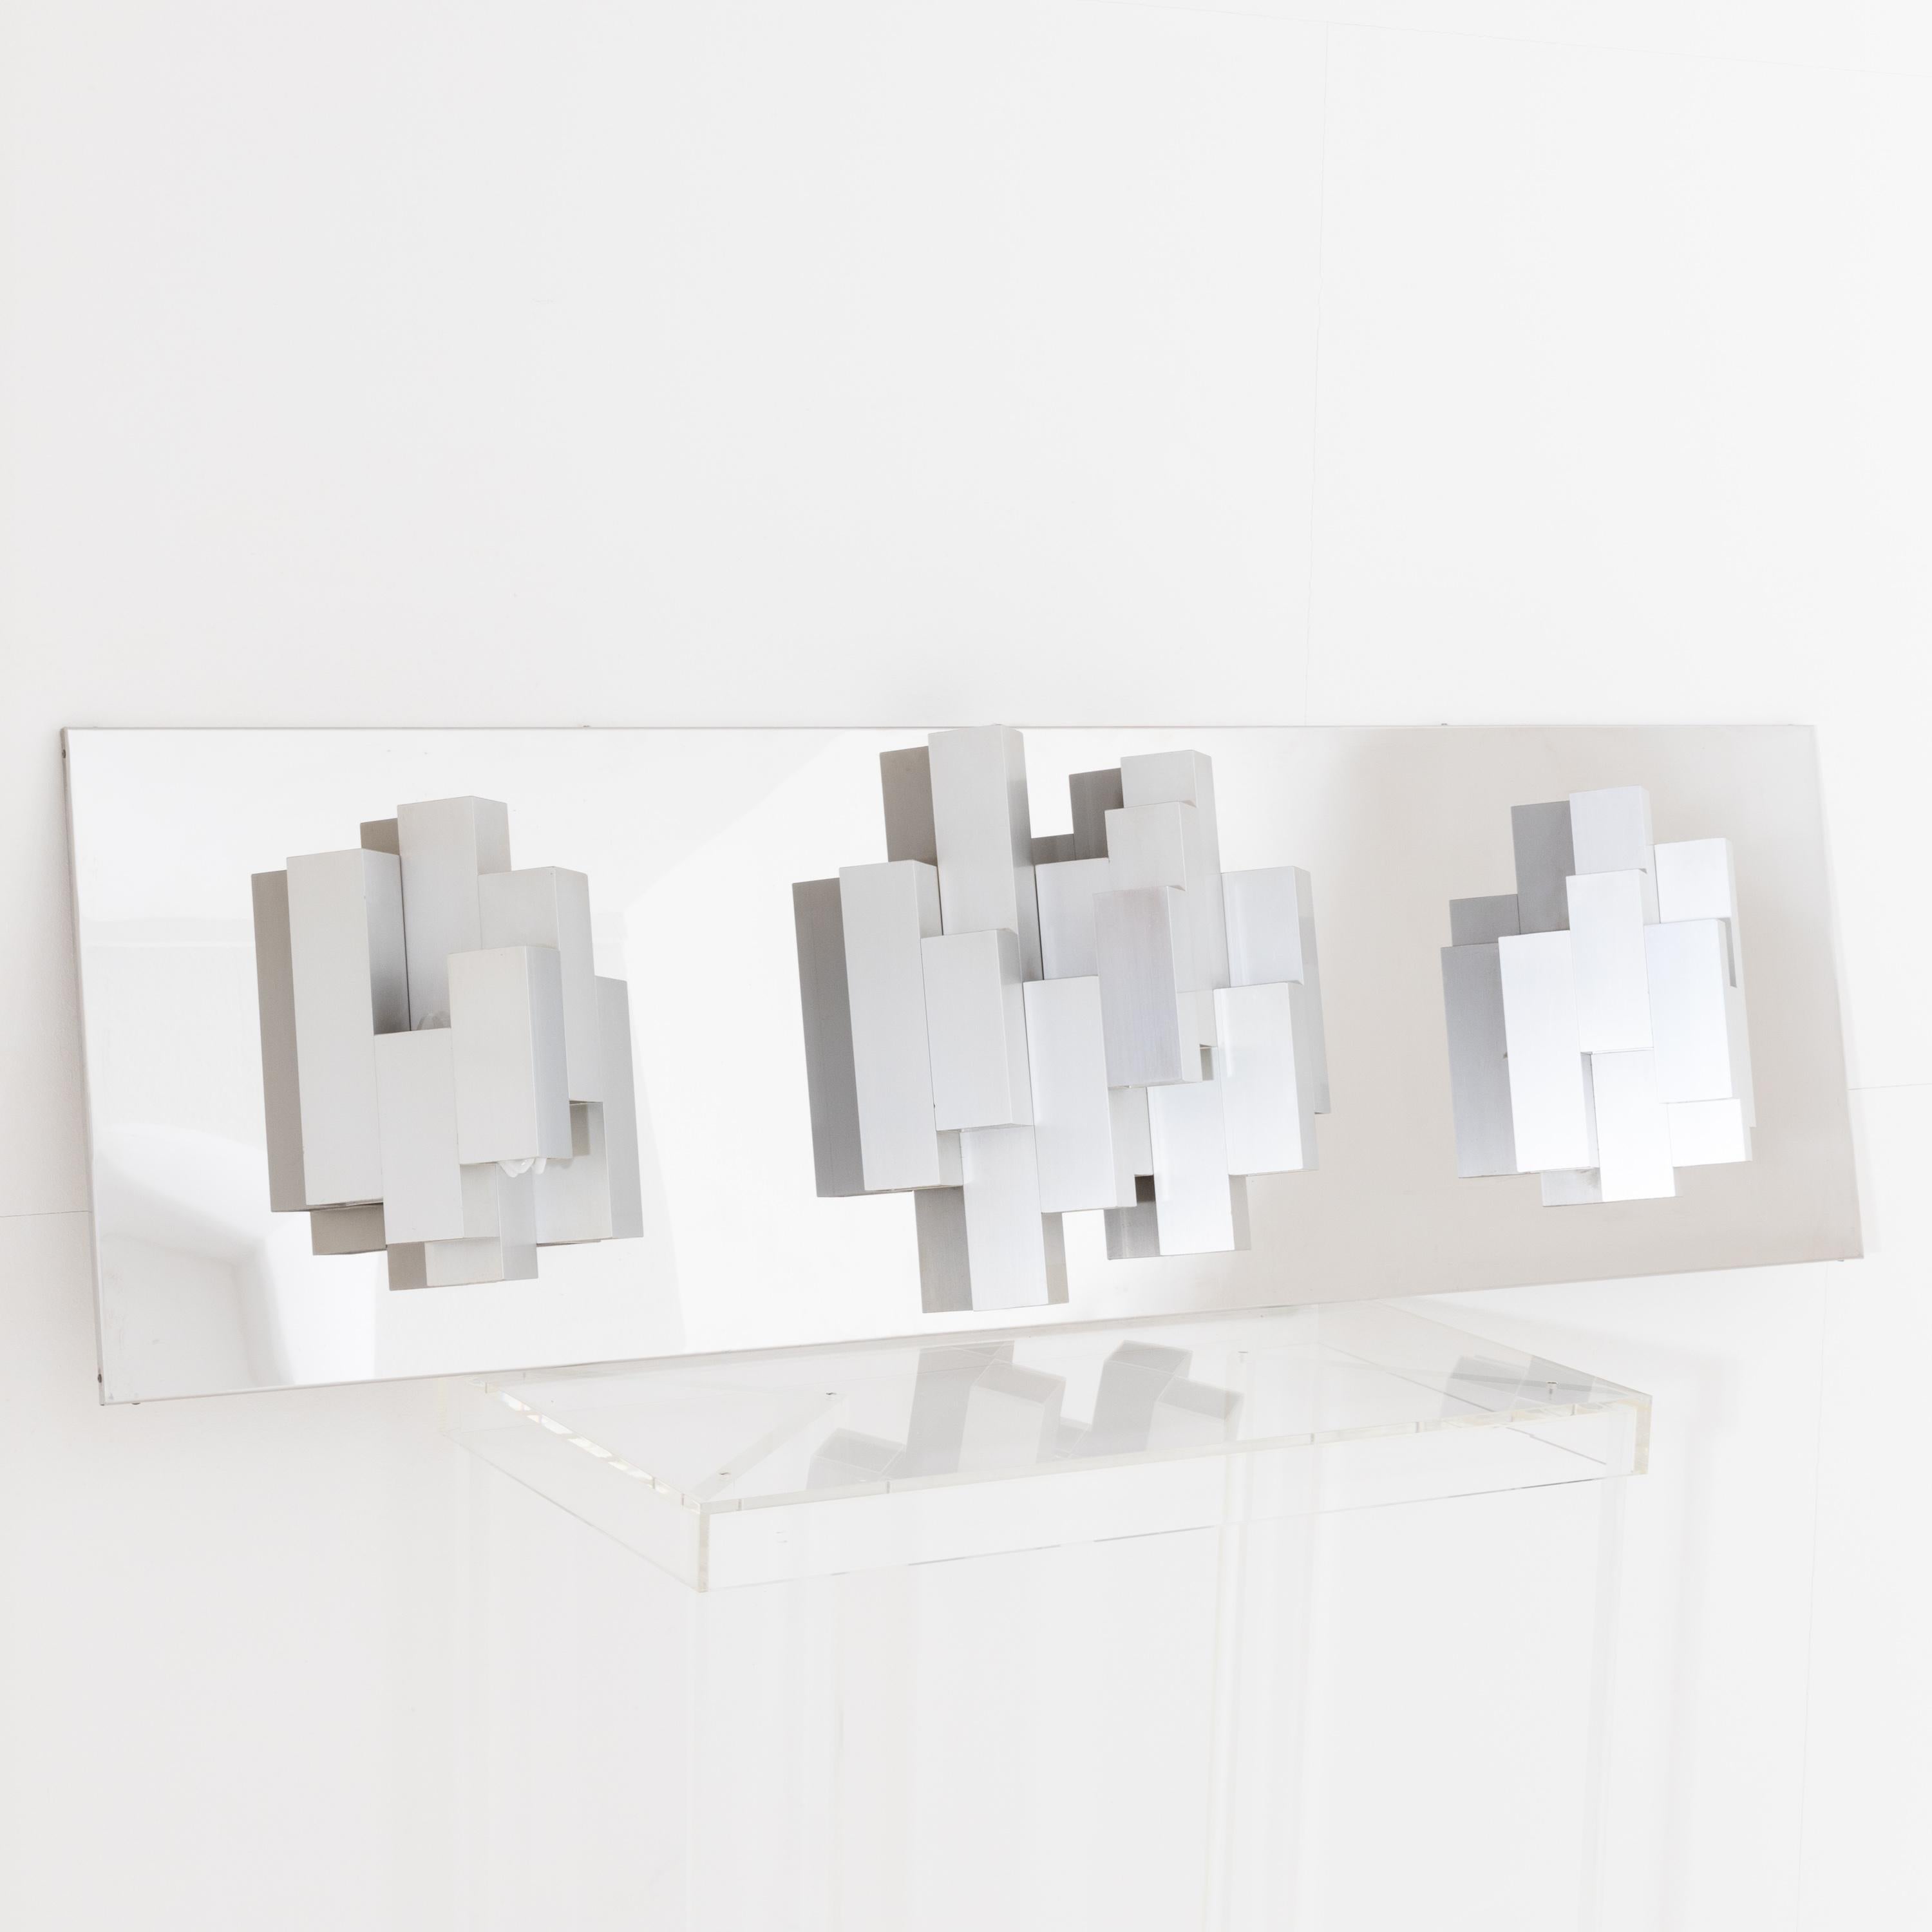 Modernist wall lamp made of nickel-plated metal with clustered cuboids arranged in three groups on a long rectangular base plate. The lamp holders are arranged alternately upwards and downwards, thus creating an interesting play of light.
For the